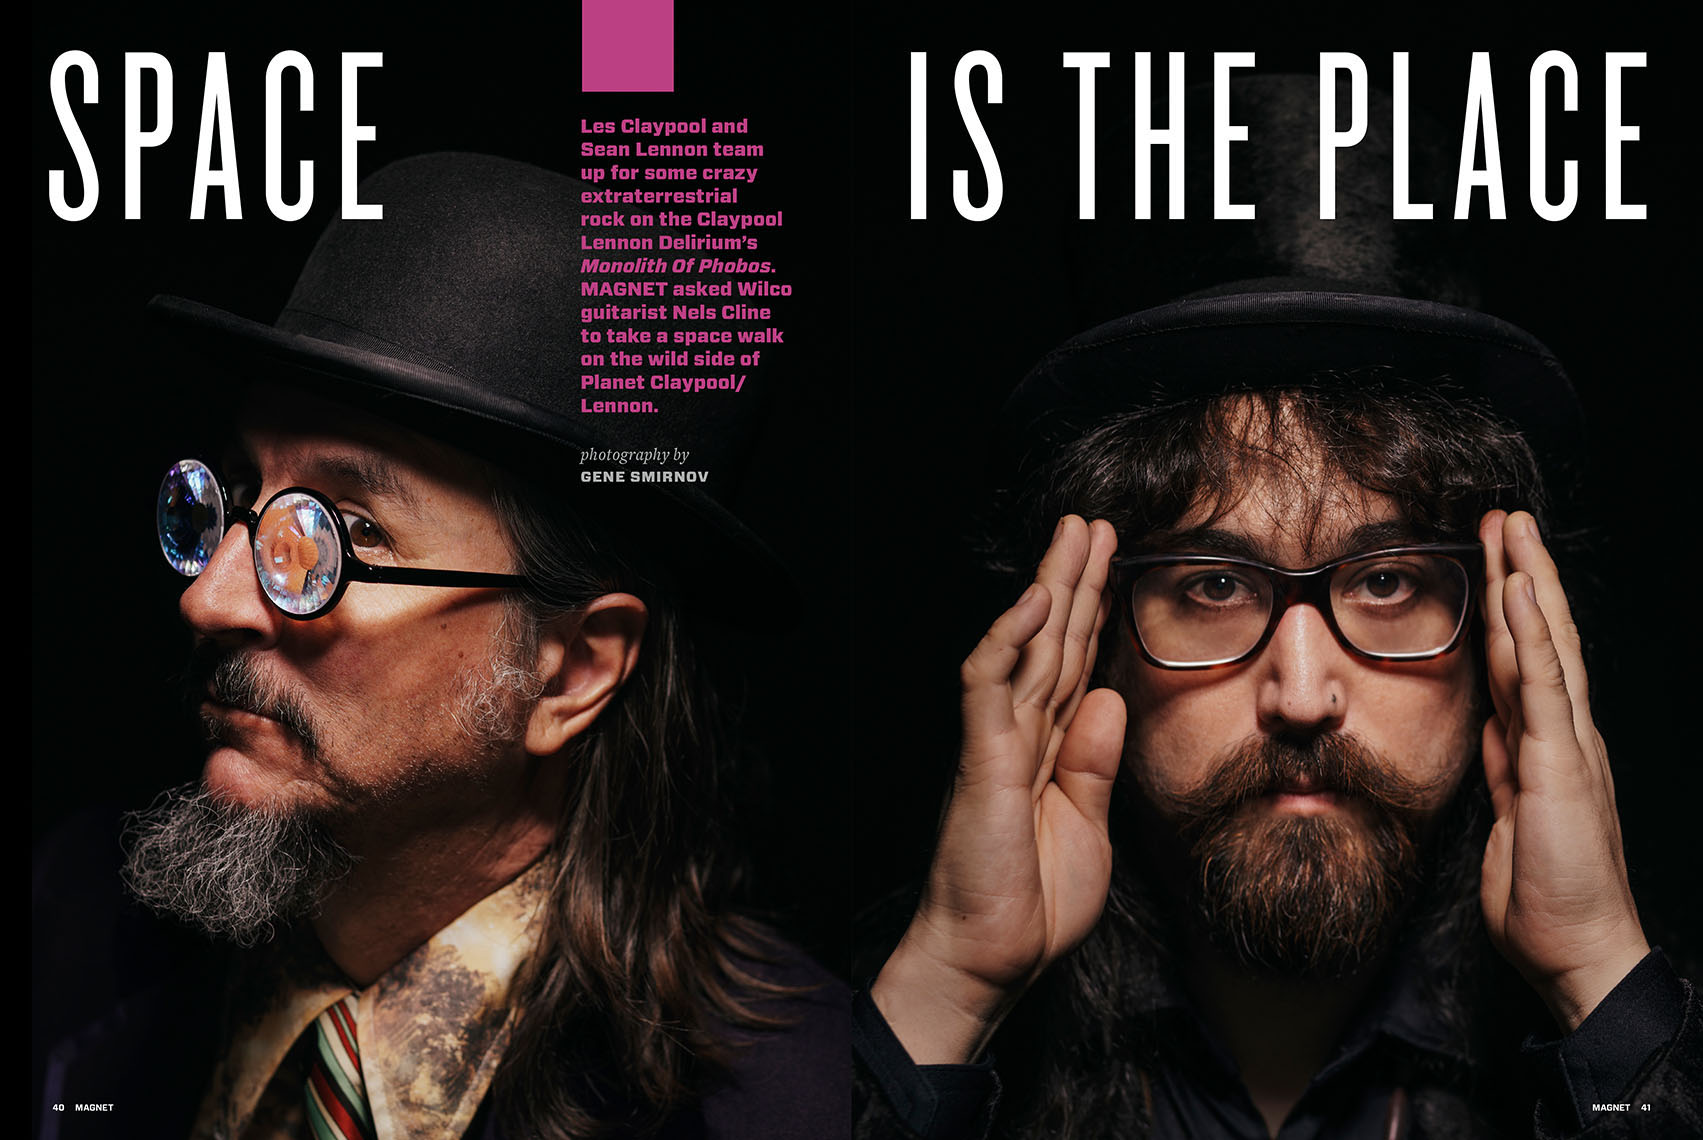 Les Claypool and Sean Lennon for Magnet 